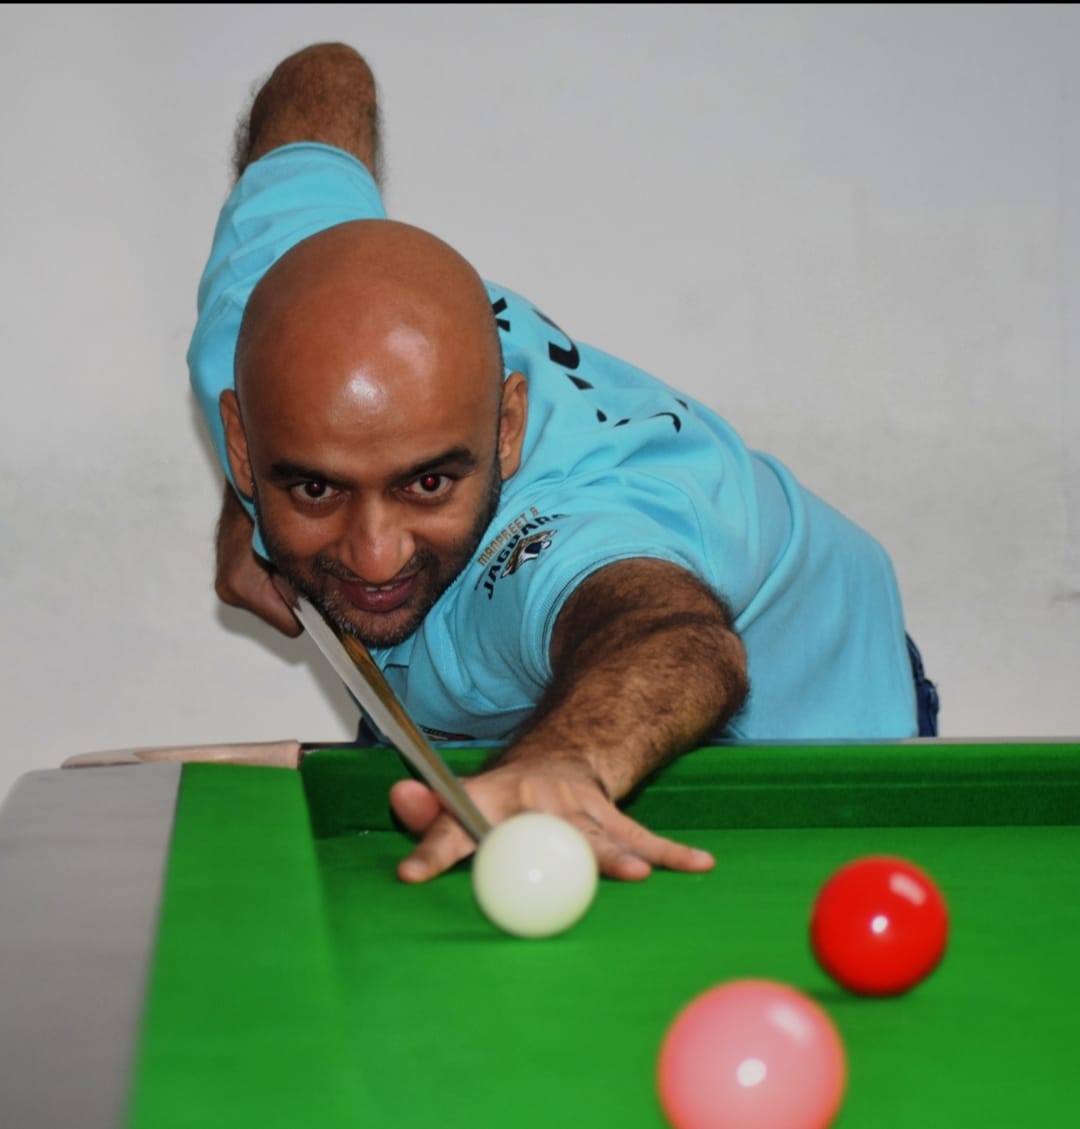 The Whirlwinds,RS Cannons, All Stars, Ball Breakers into semifinals of the First edition of the PCBSL(Poona club Billiards and Snooker League)